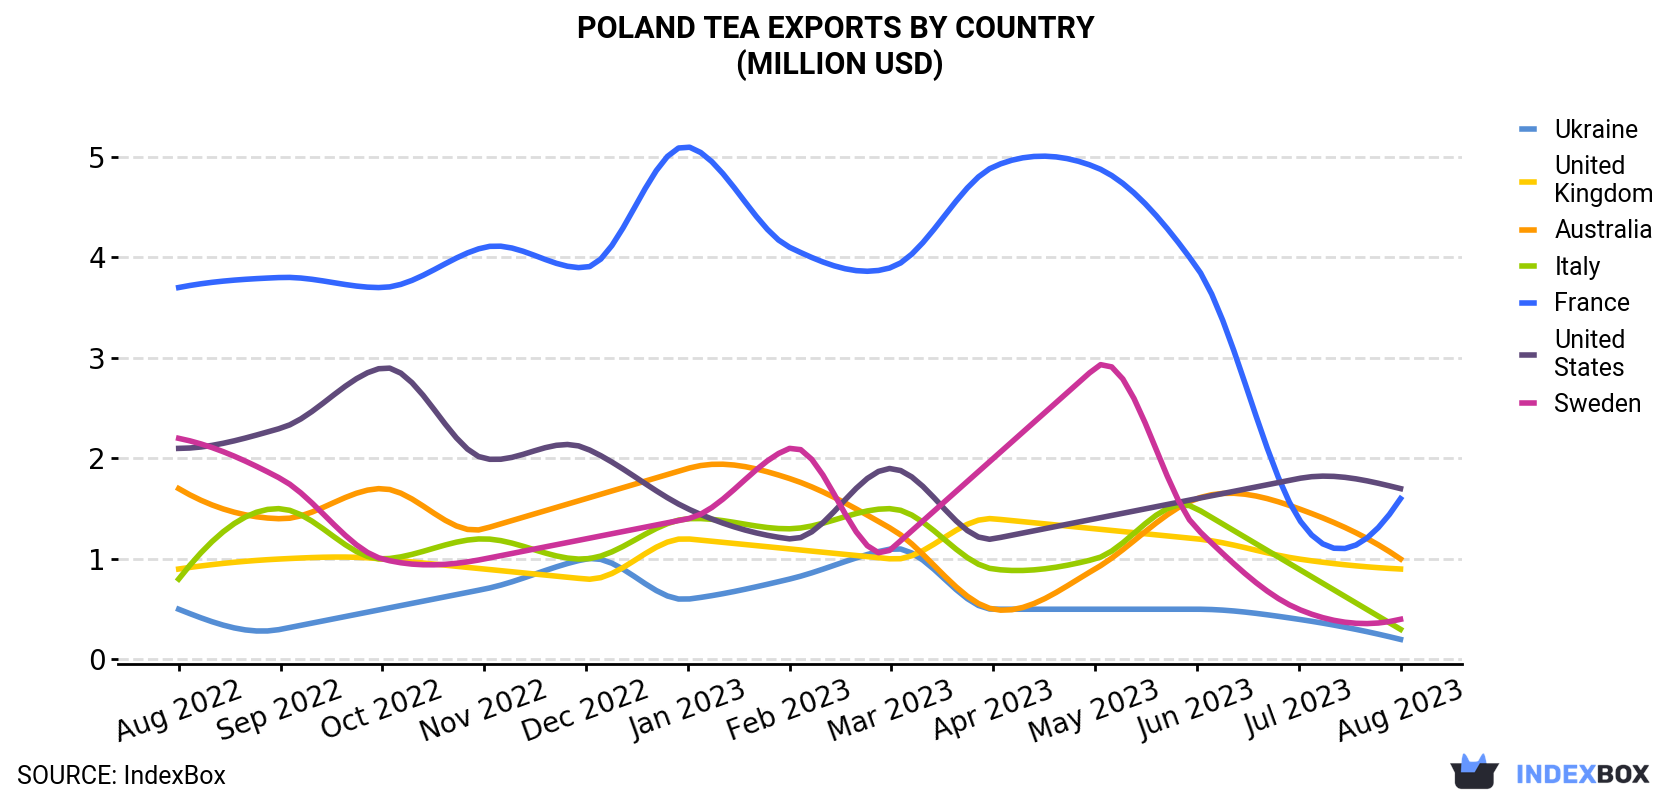 Poland Tea Exports By Country (Million USD)